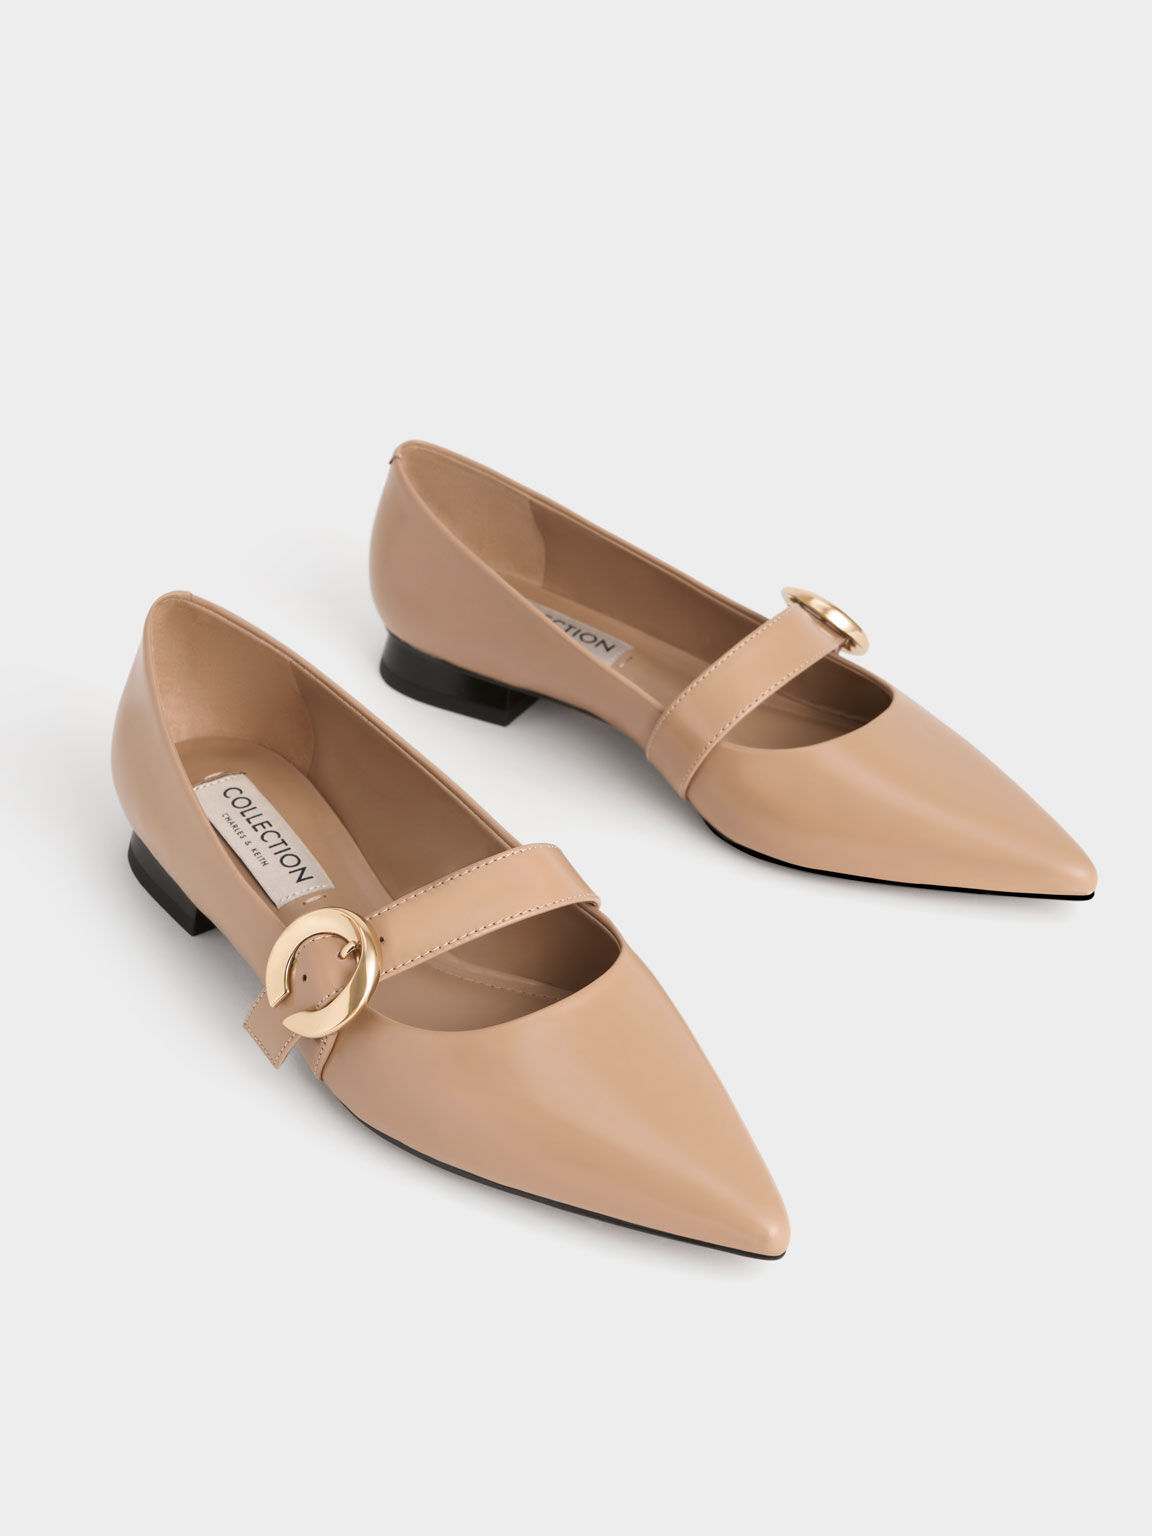 Nude Metallic Buckle Leather Mary Janes - CHARLES & KEITH OM